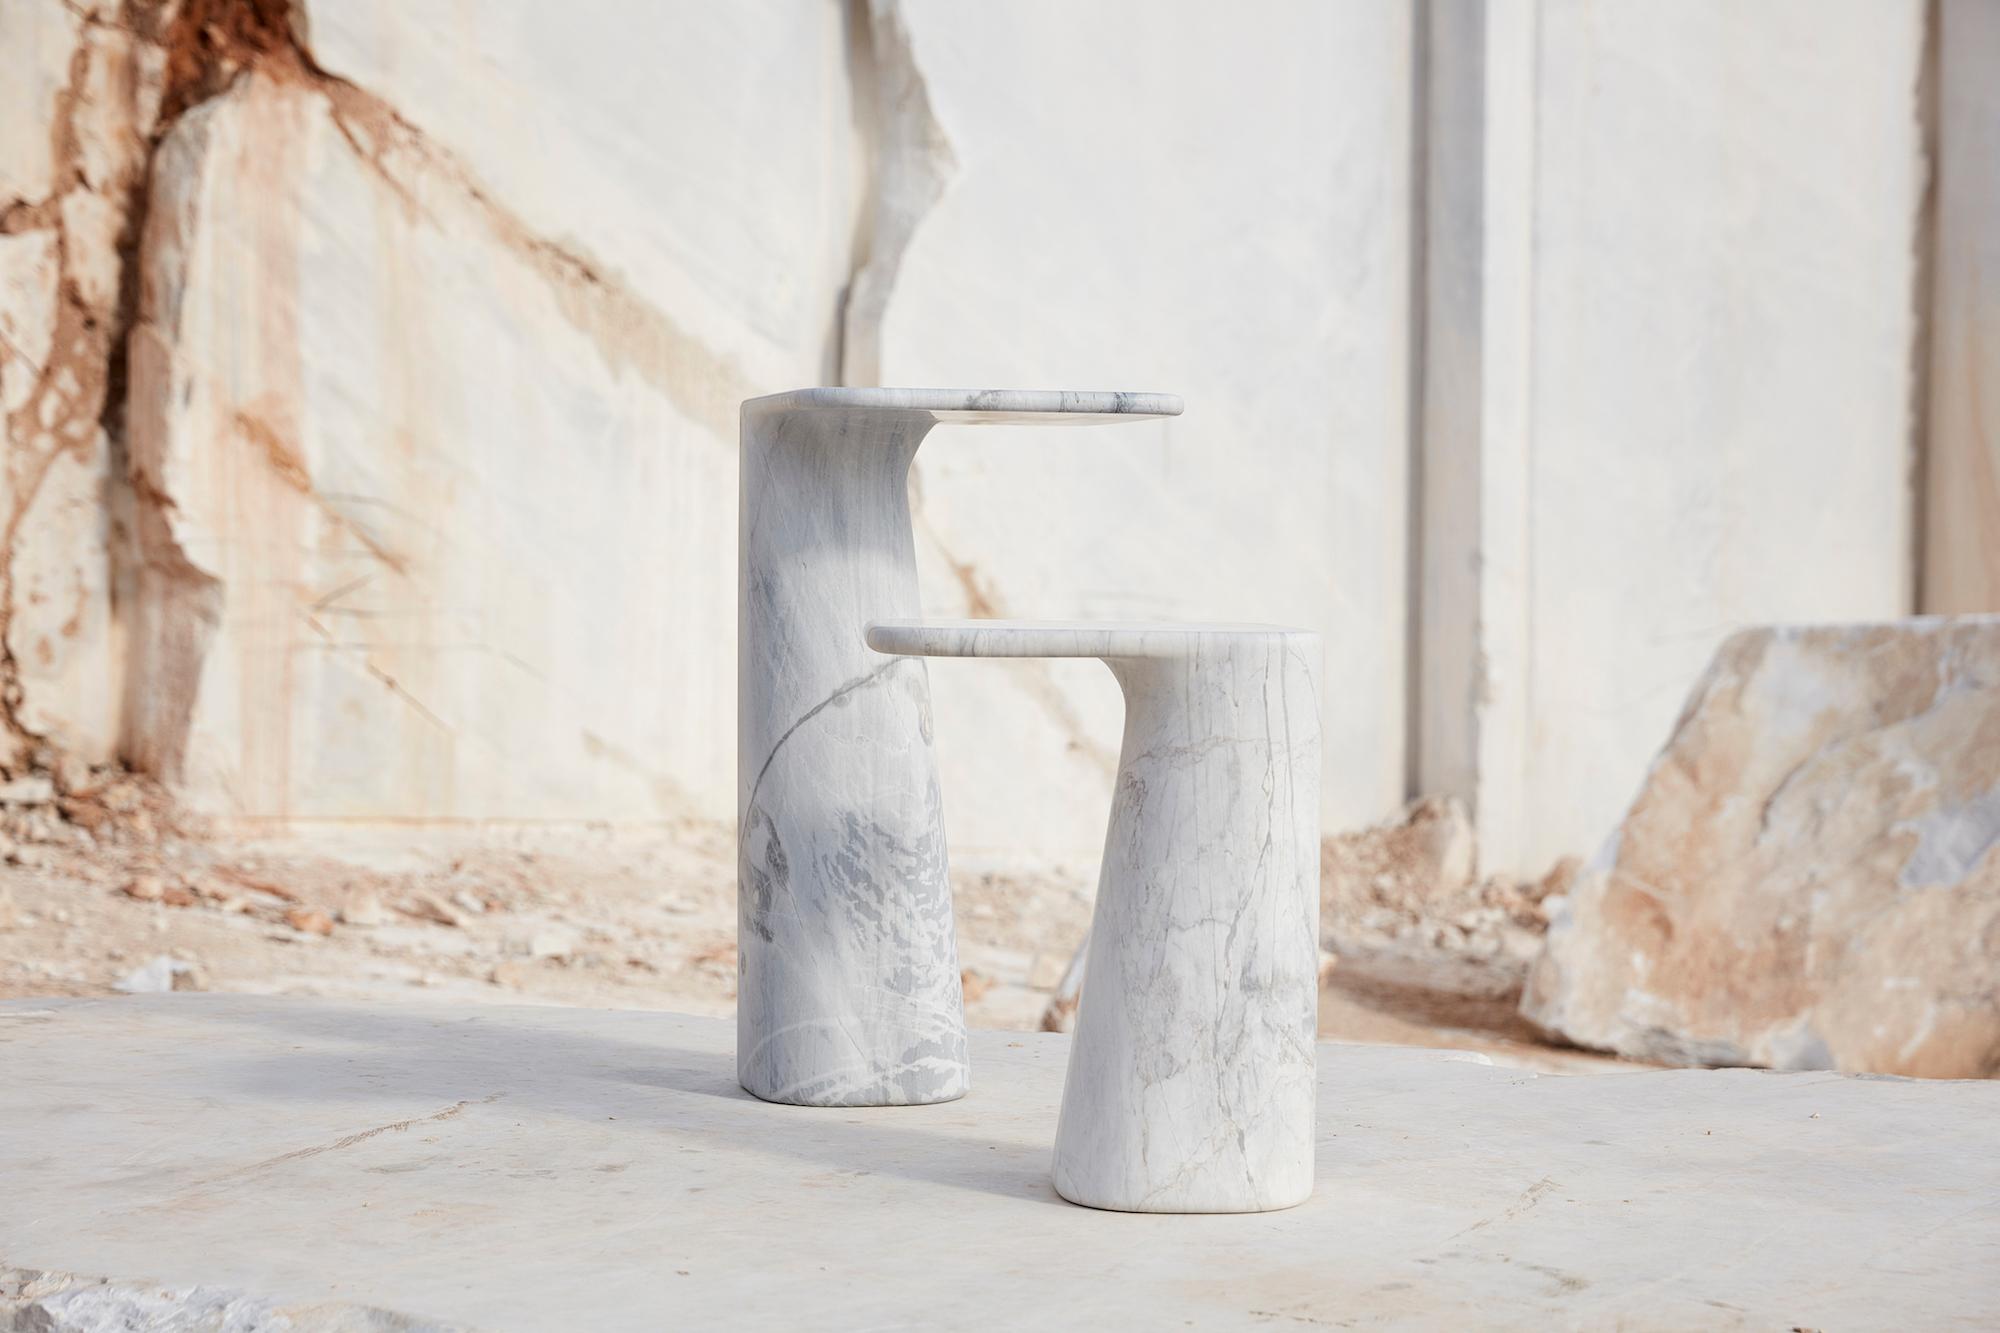 A solid piece of Elba marble is carved to create a cantilevered resting surface for objects. This is stone at its purest: simple, distinctive and statuesque. Cut to heights of 500mm or 720mm, each side table is available individually or as a